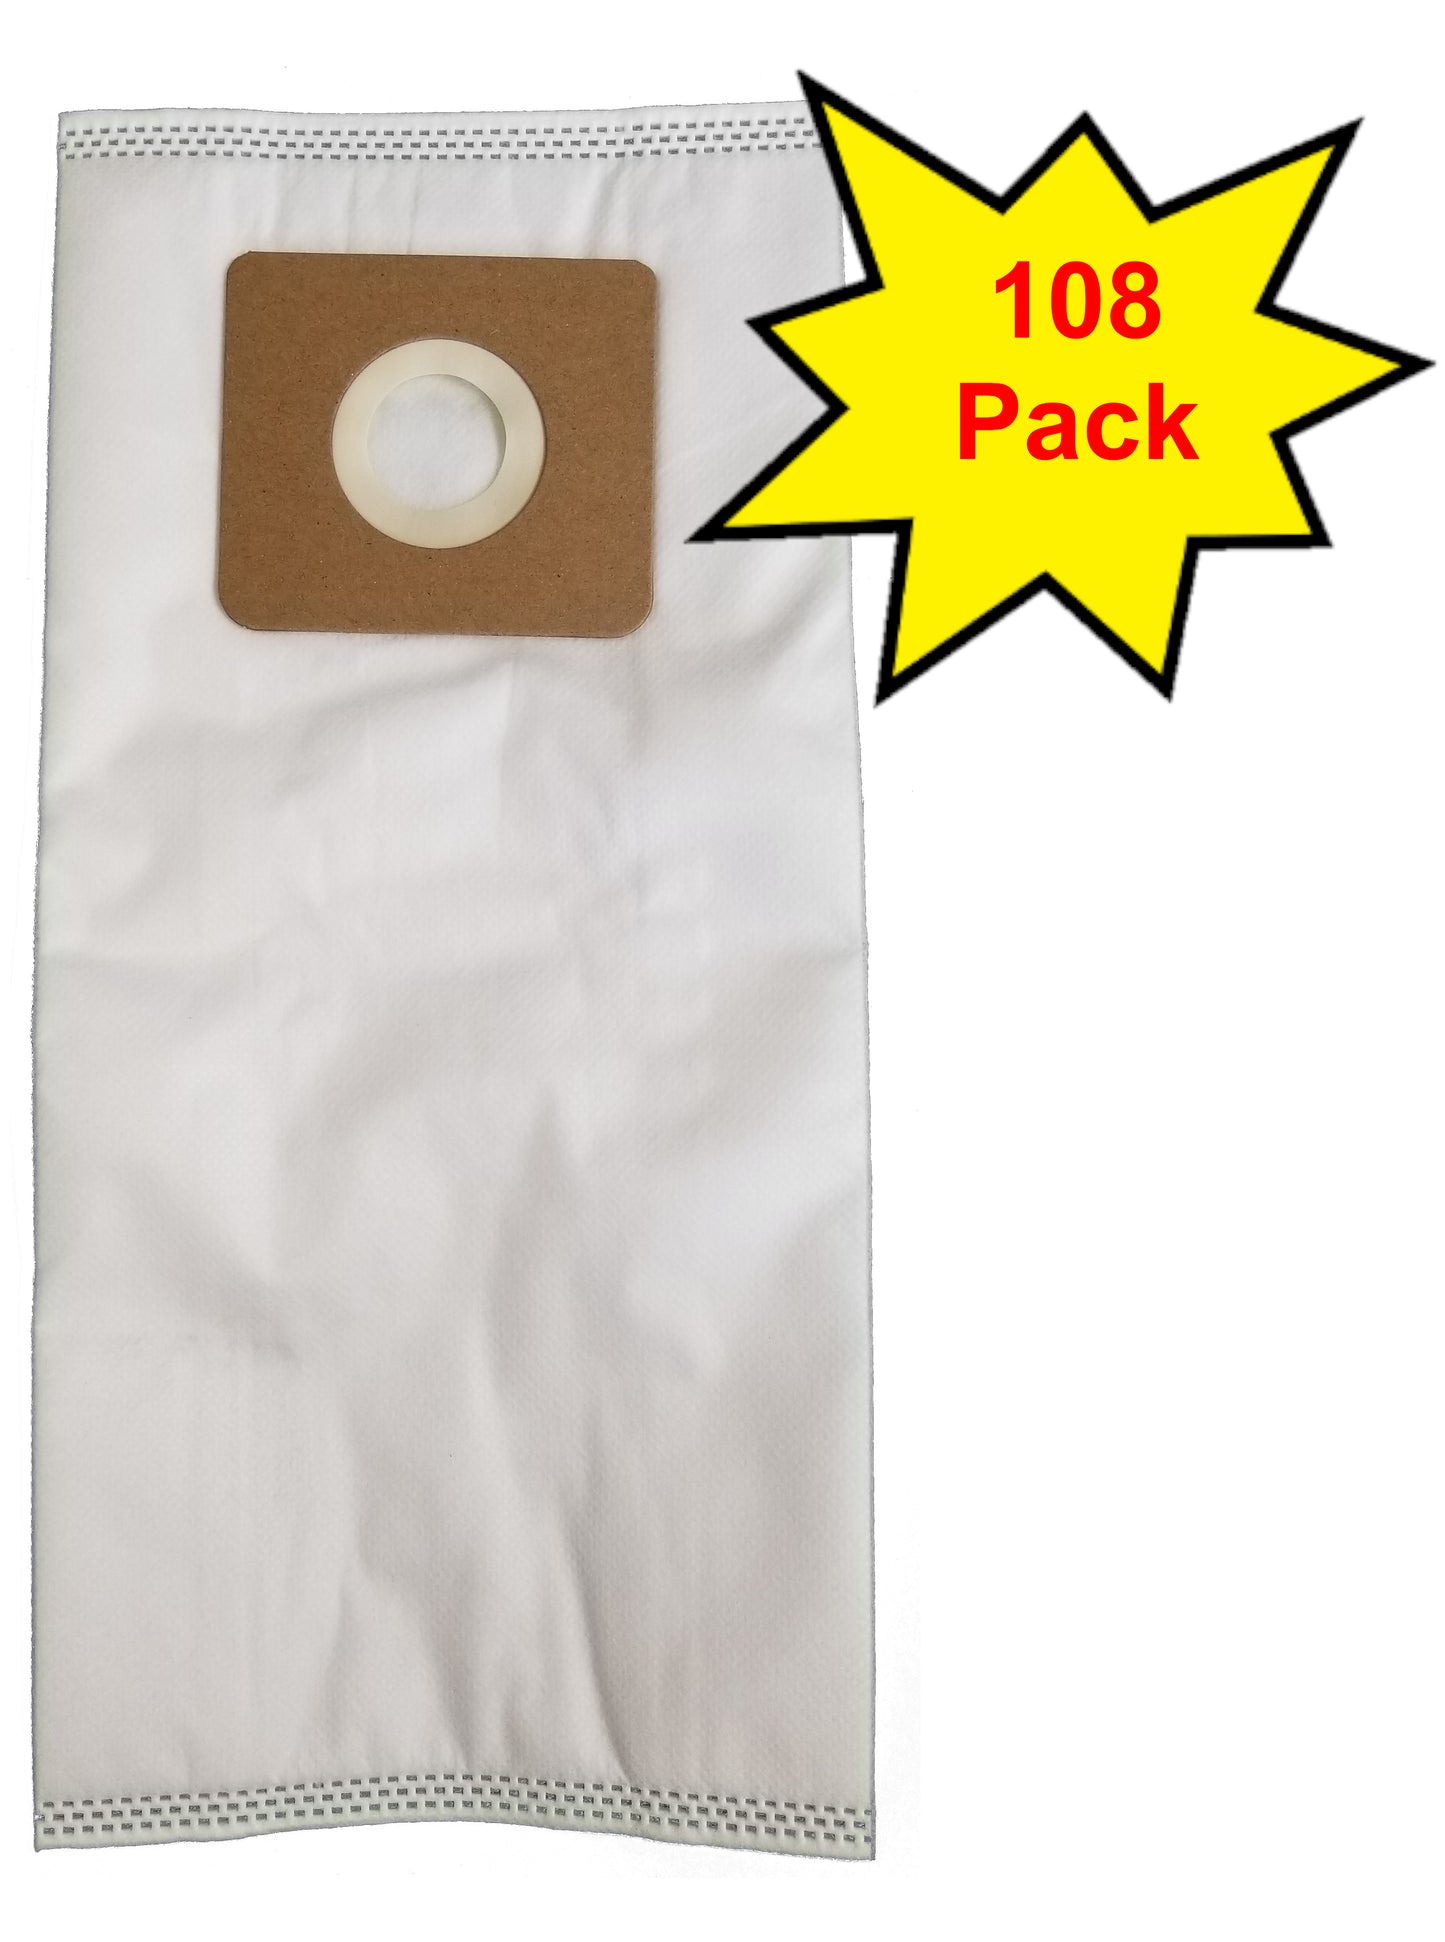 Supervacuums Type A Standard HEPA Vacuum Bags for Riccar 2000 & 4000 Series Vacuums Cleaners